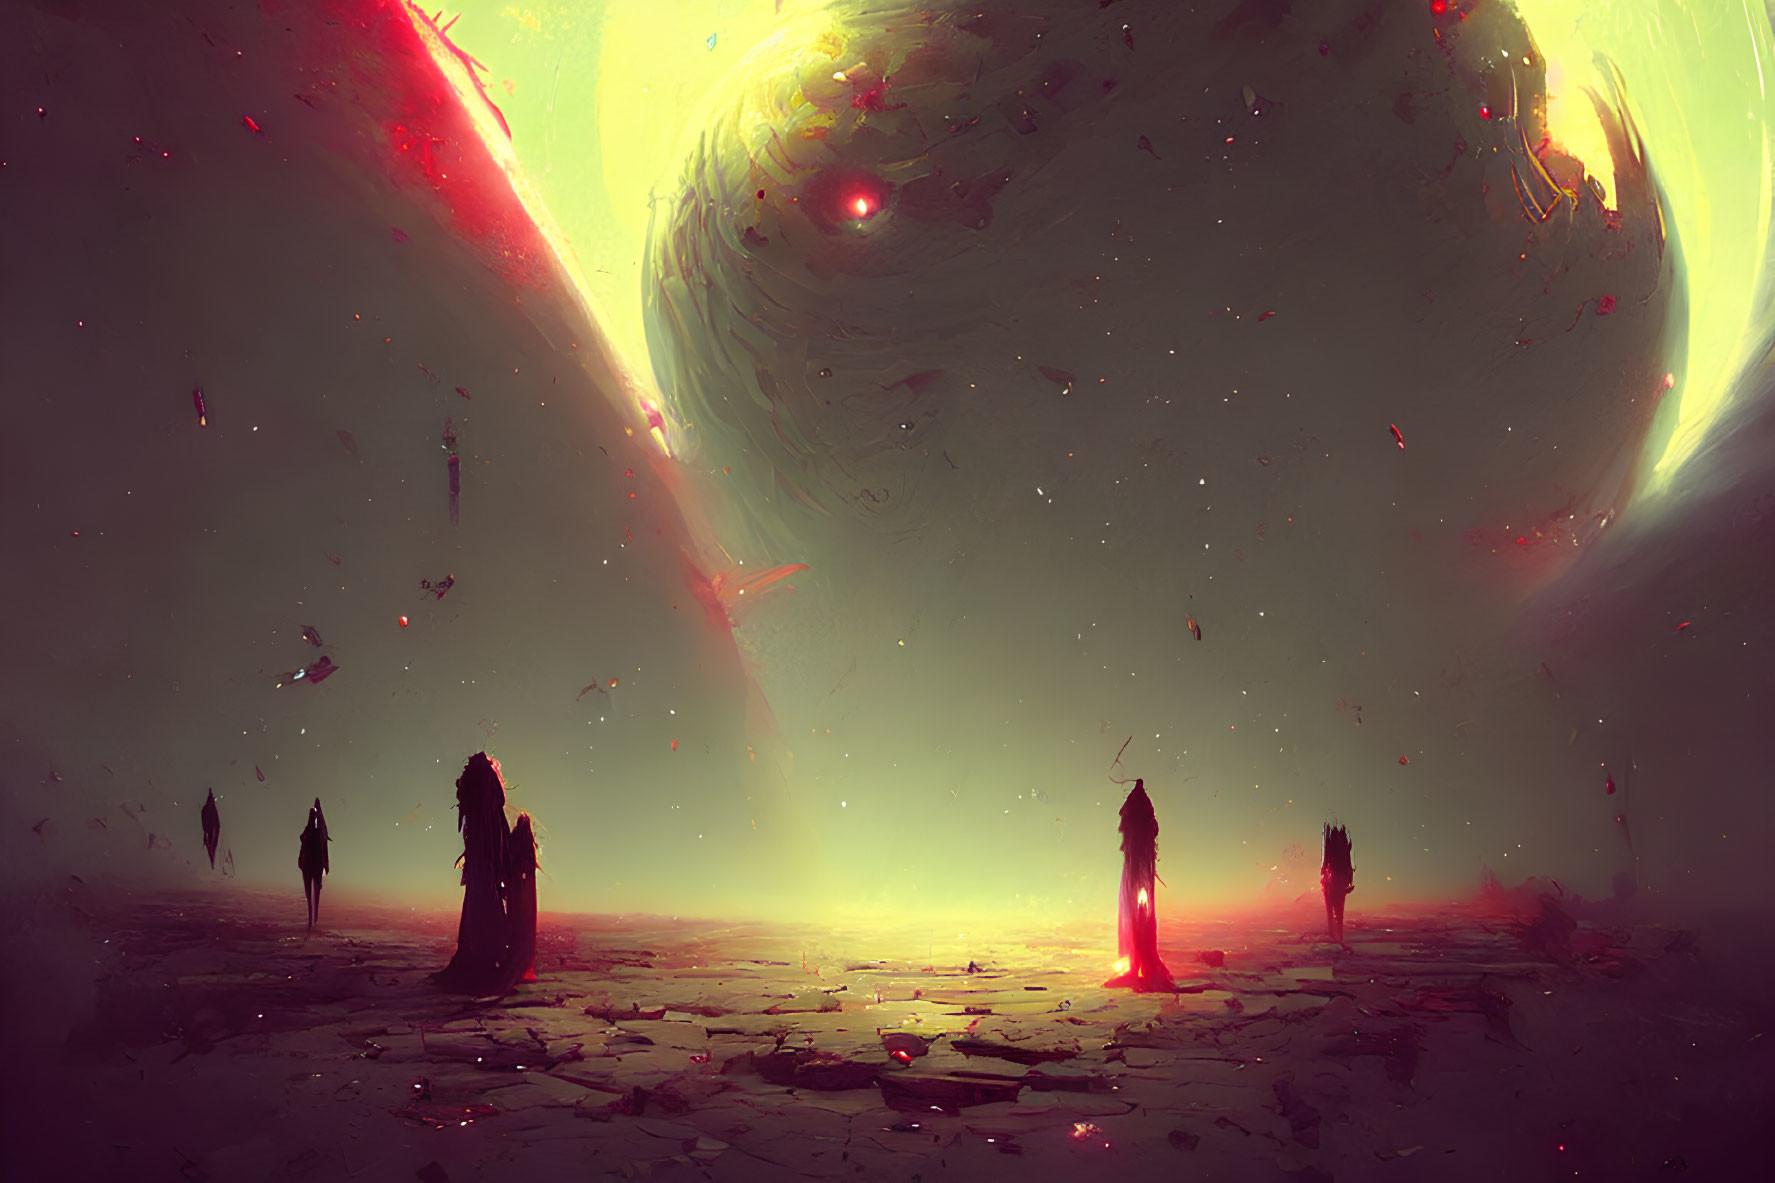 Surreal landscape with figures under a green-lit sky and cosmic anomalies